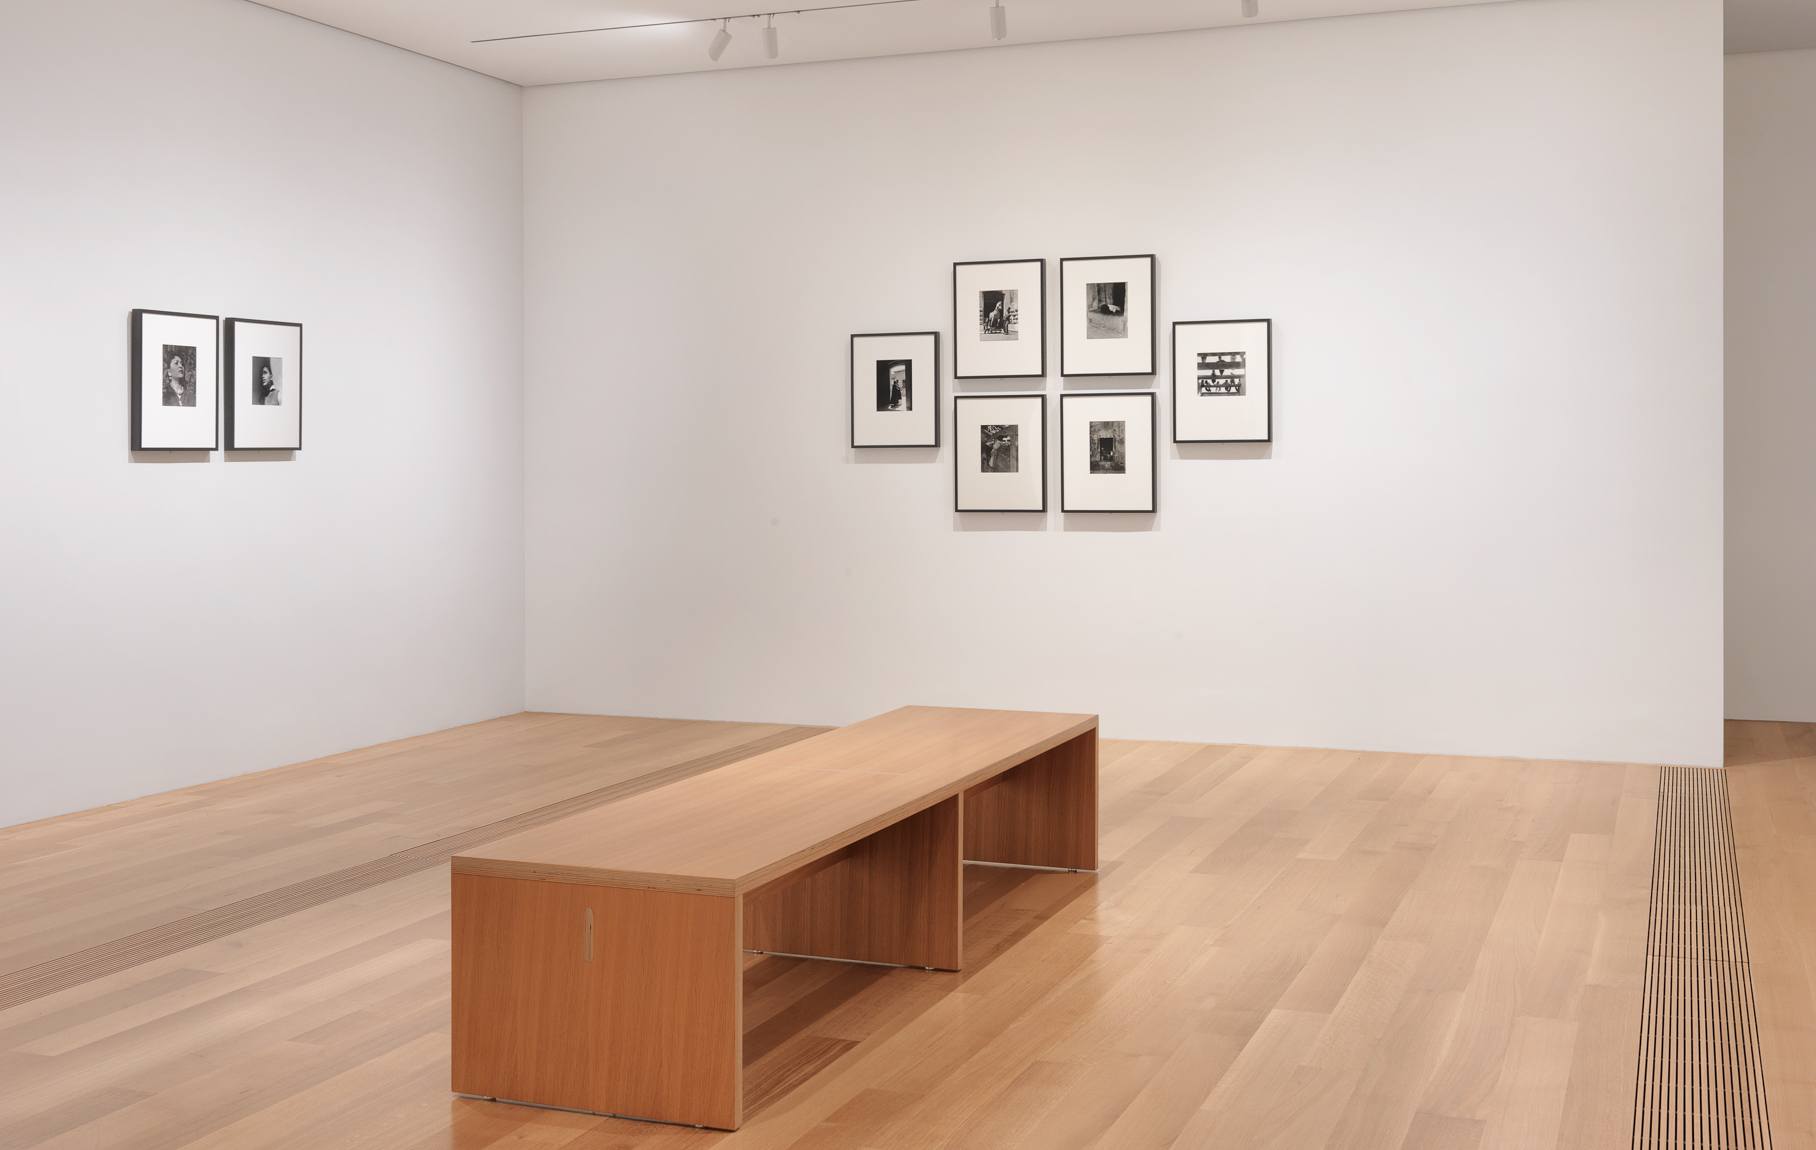 A view of Lola Álvarez Bravo's framed black and white photographs in the Lower West Gallery.